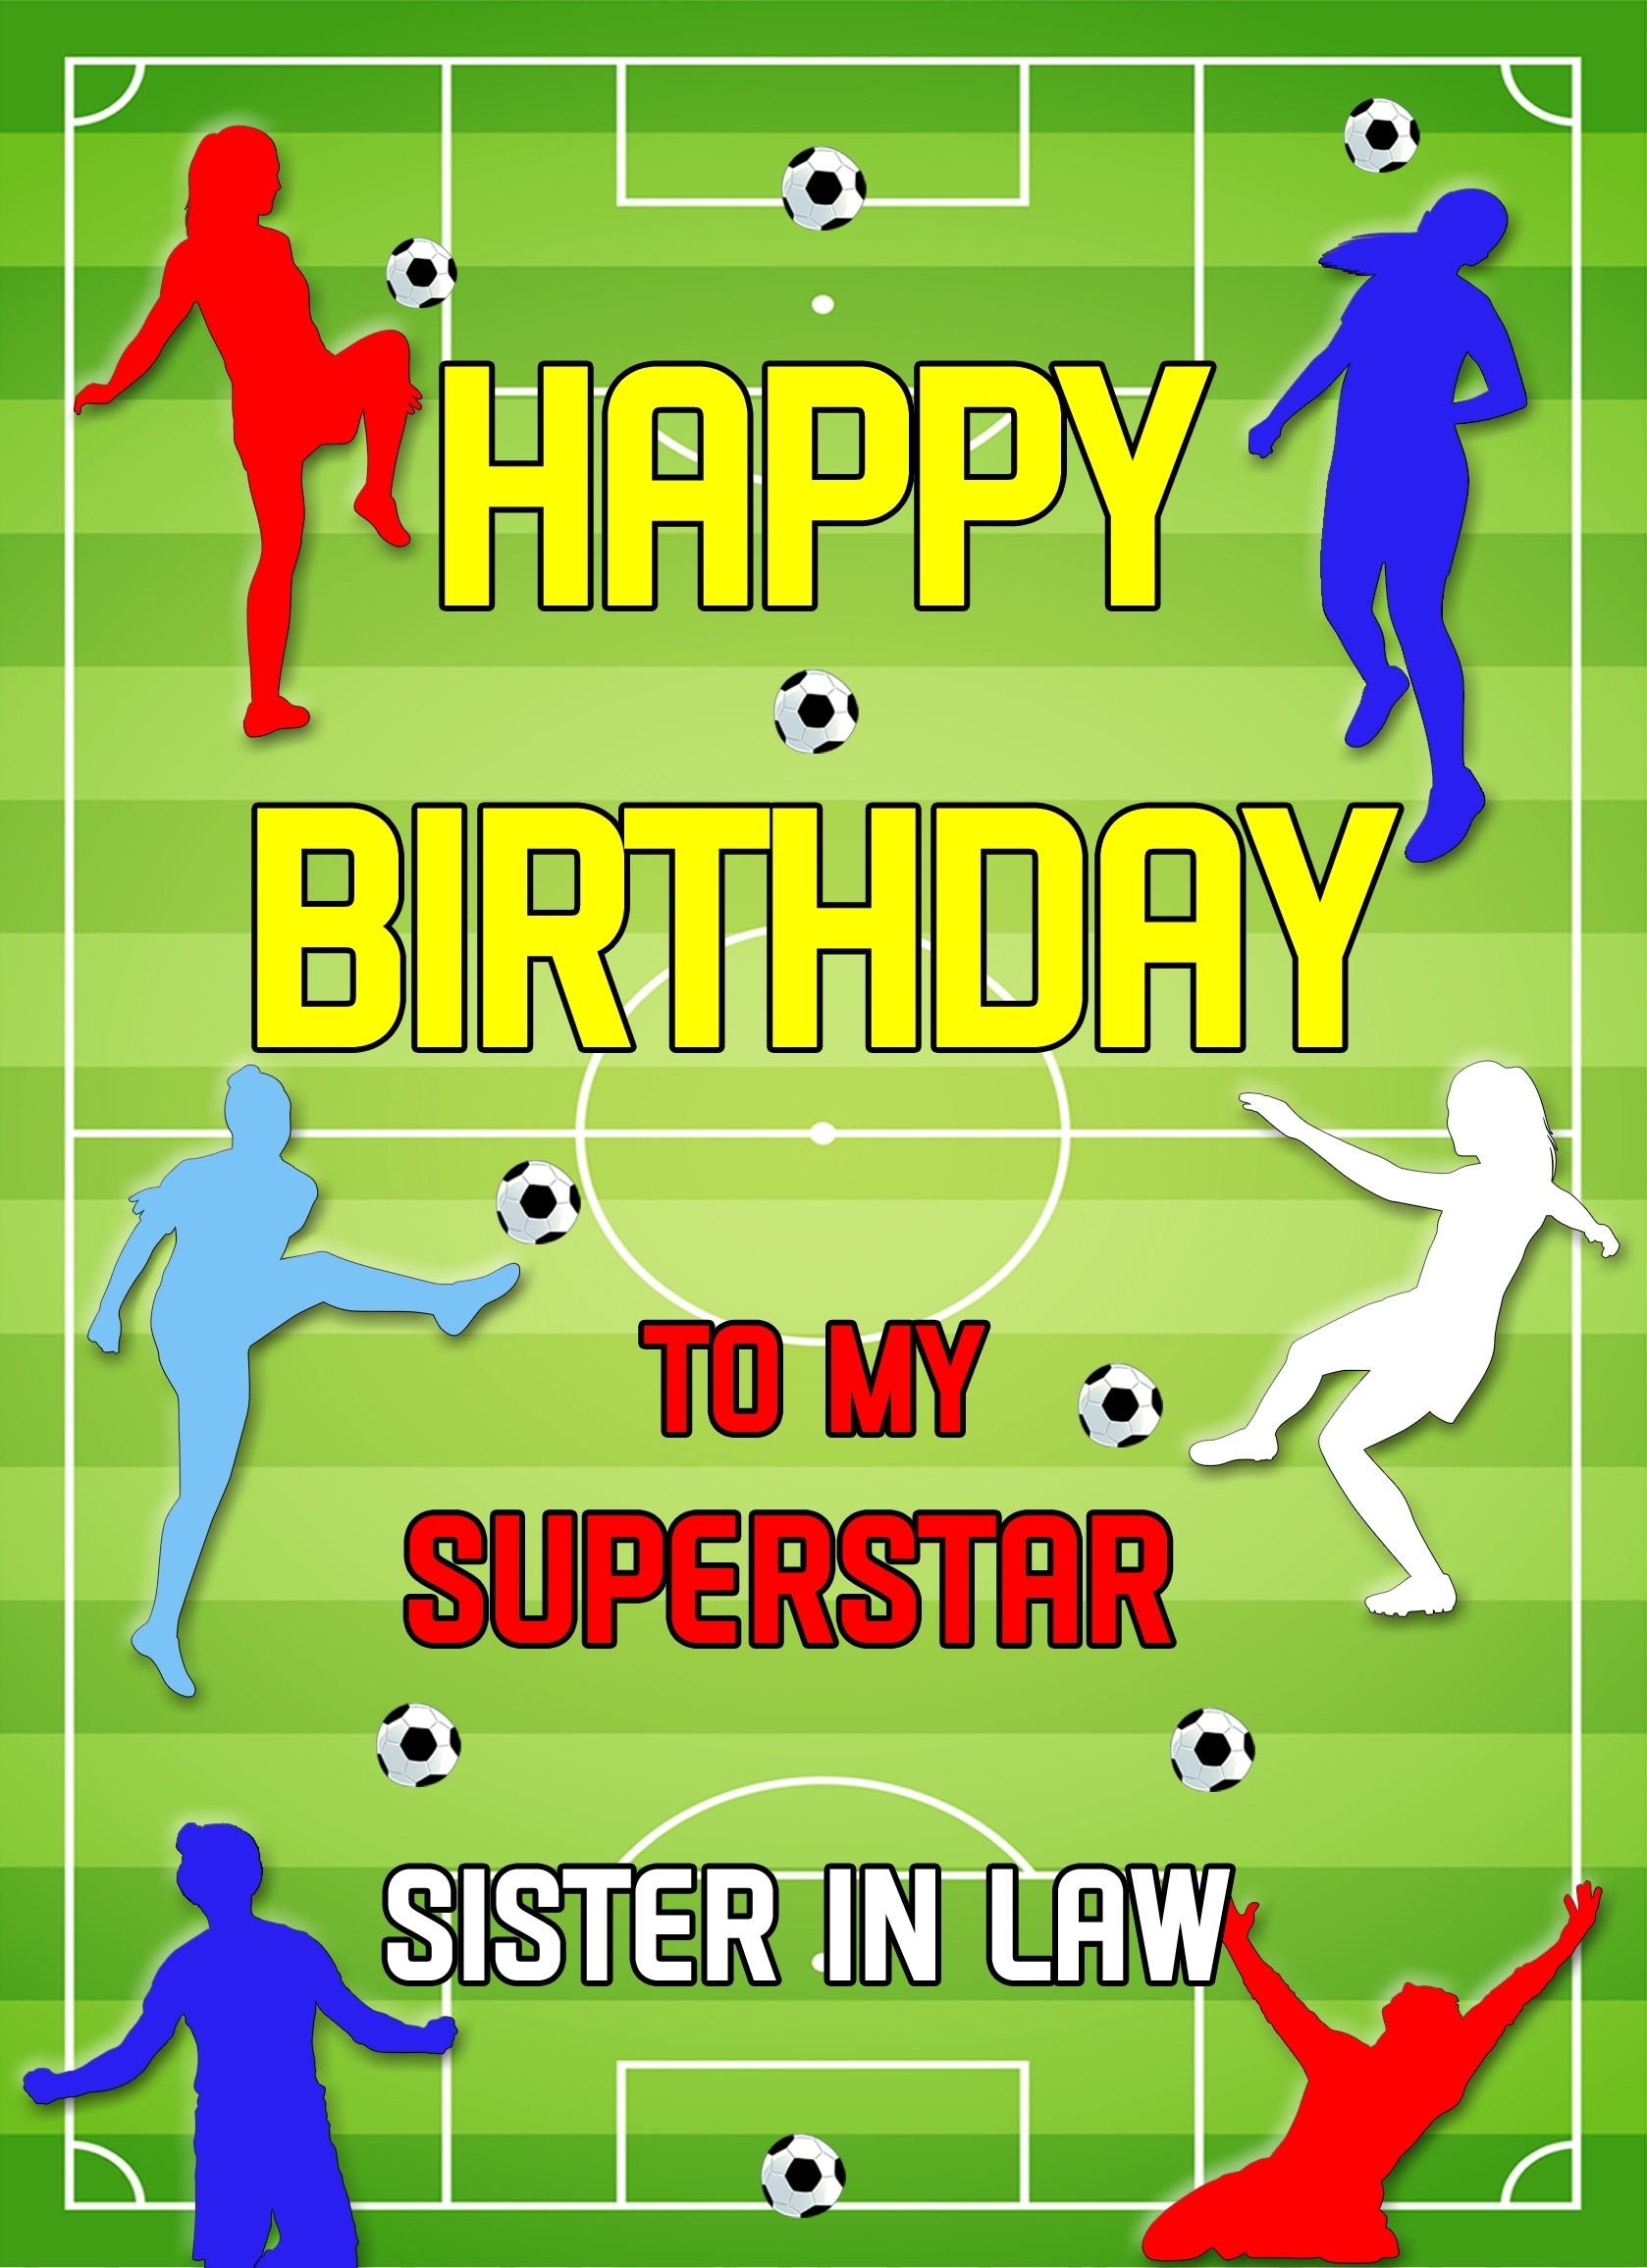 Football Birthday Card For Sister in Law